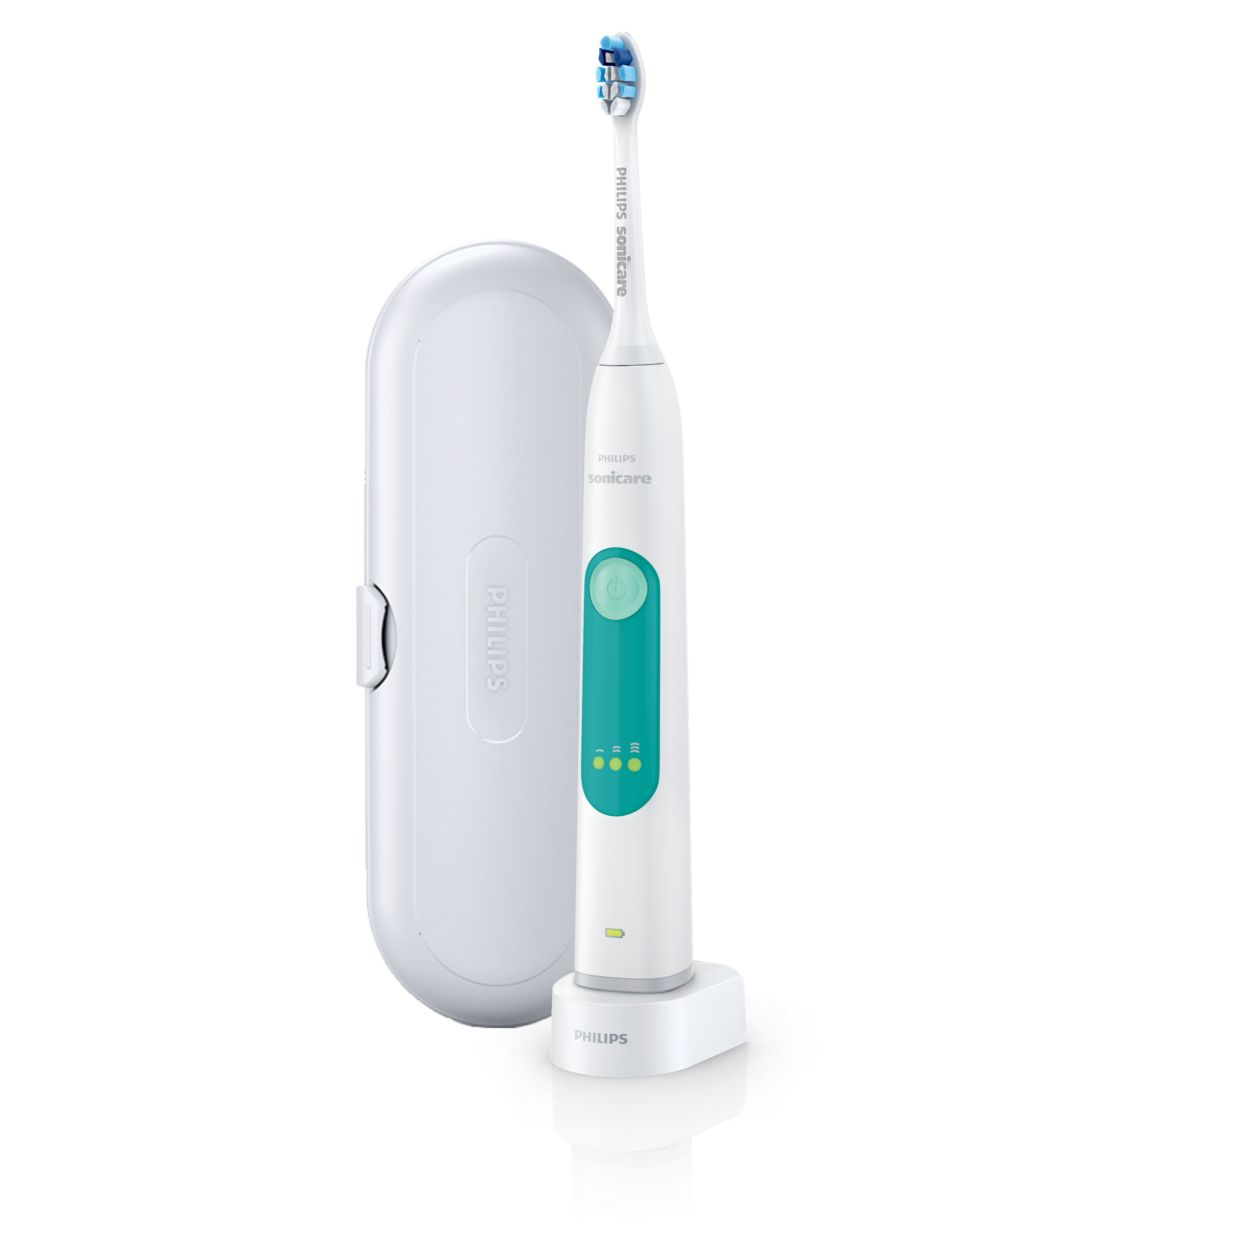 Patch Laster Grillig 3 Series gum health Sonic electric toothbrush HX6631/02 | Sonicare